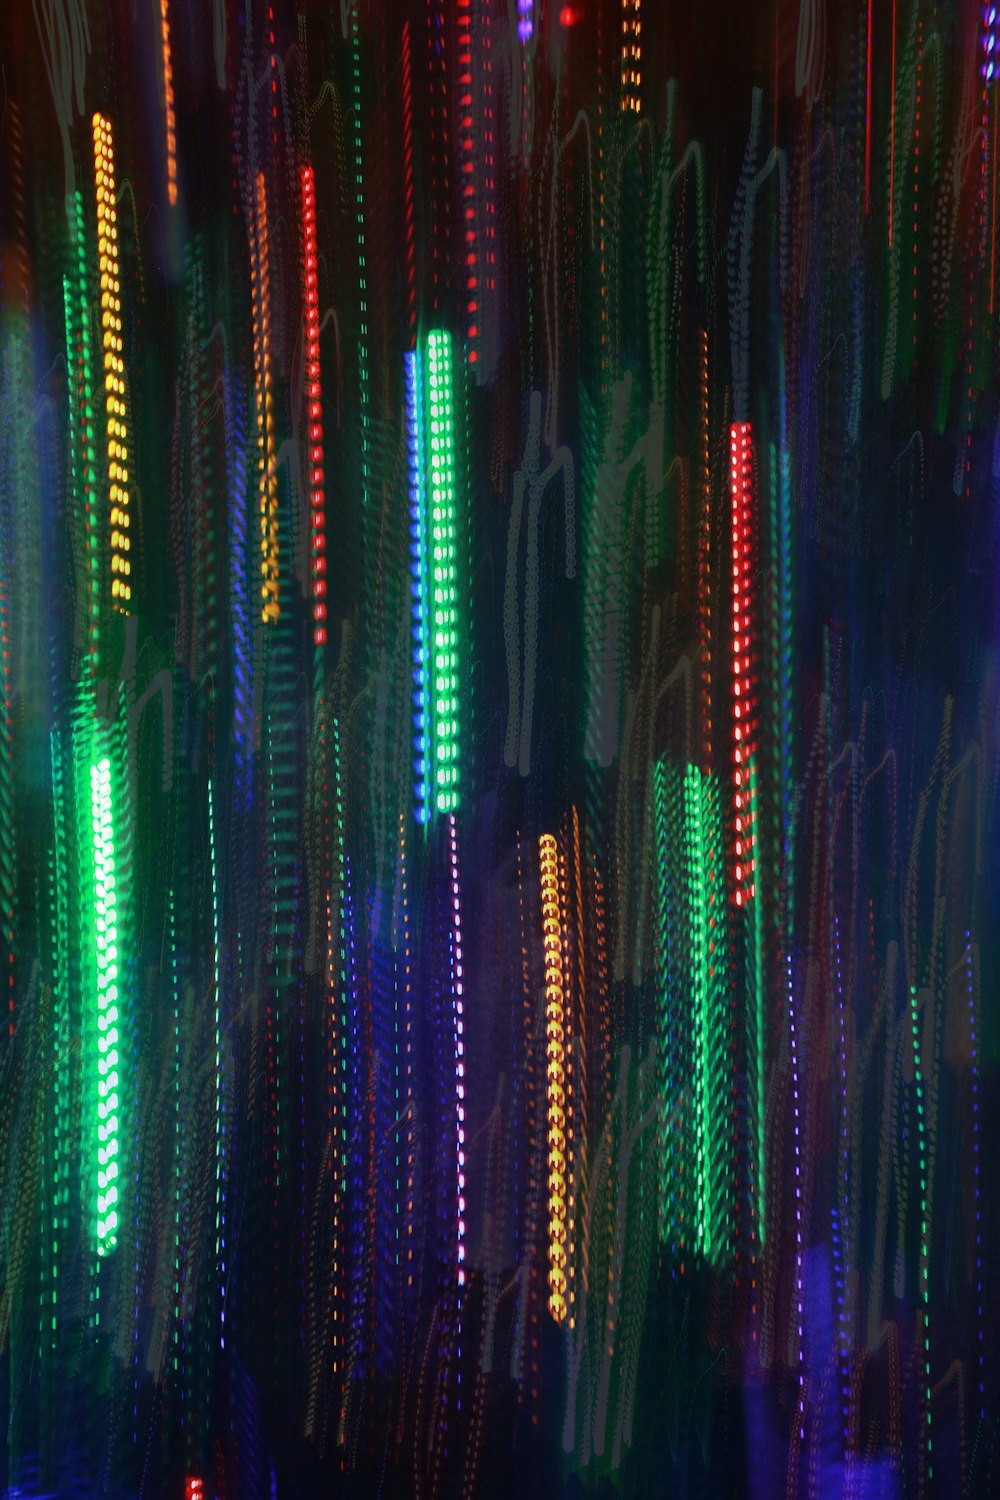 a colorful display of lights in a dark room